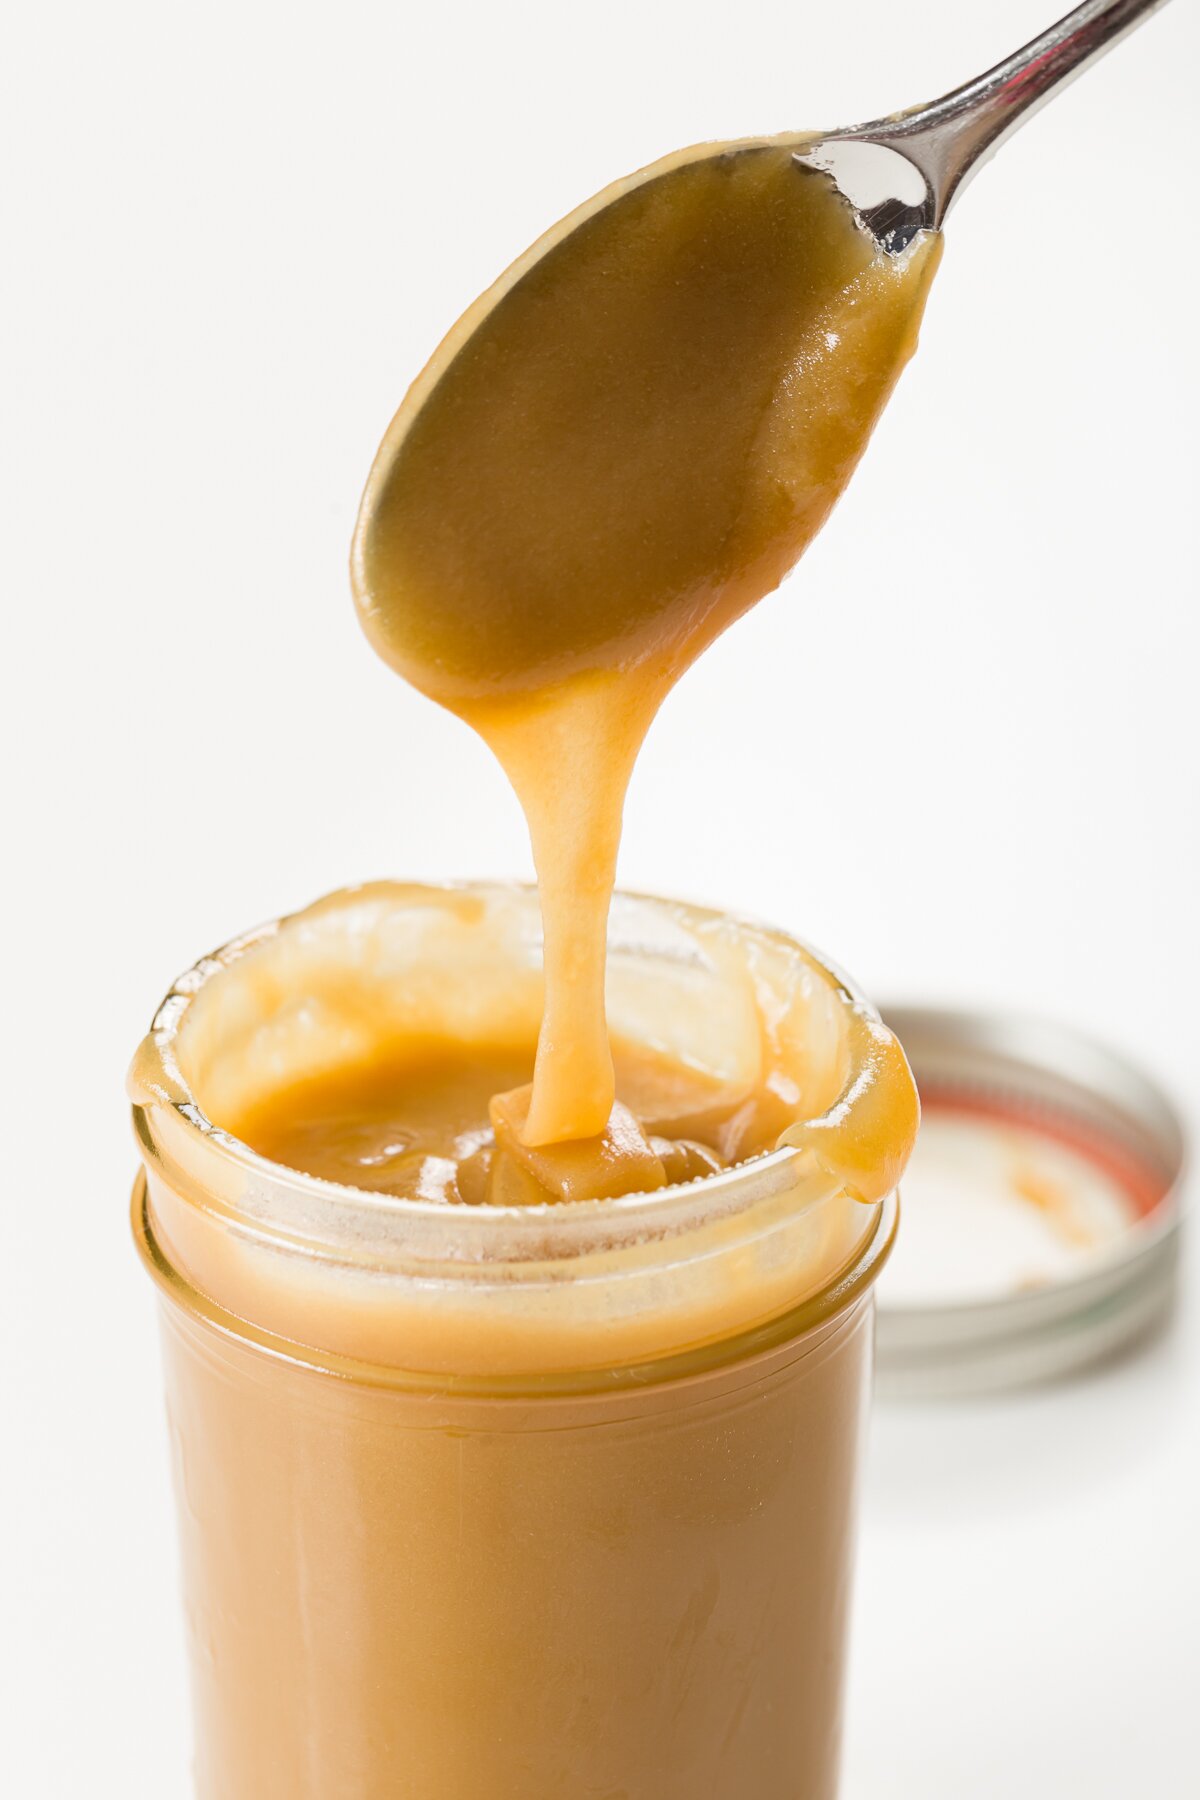 Whiskey sauce being poured into a jar from a spoon